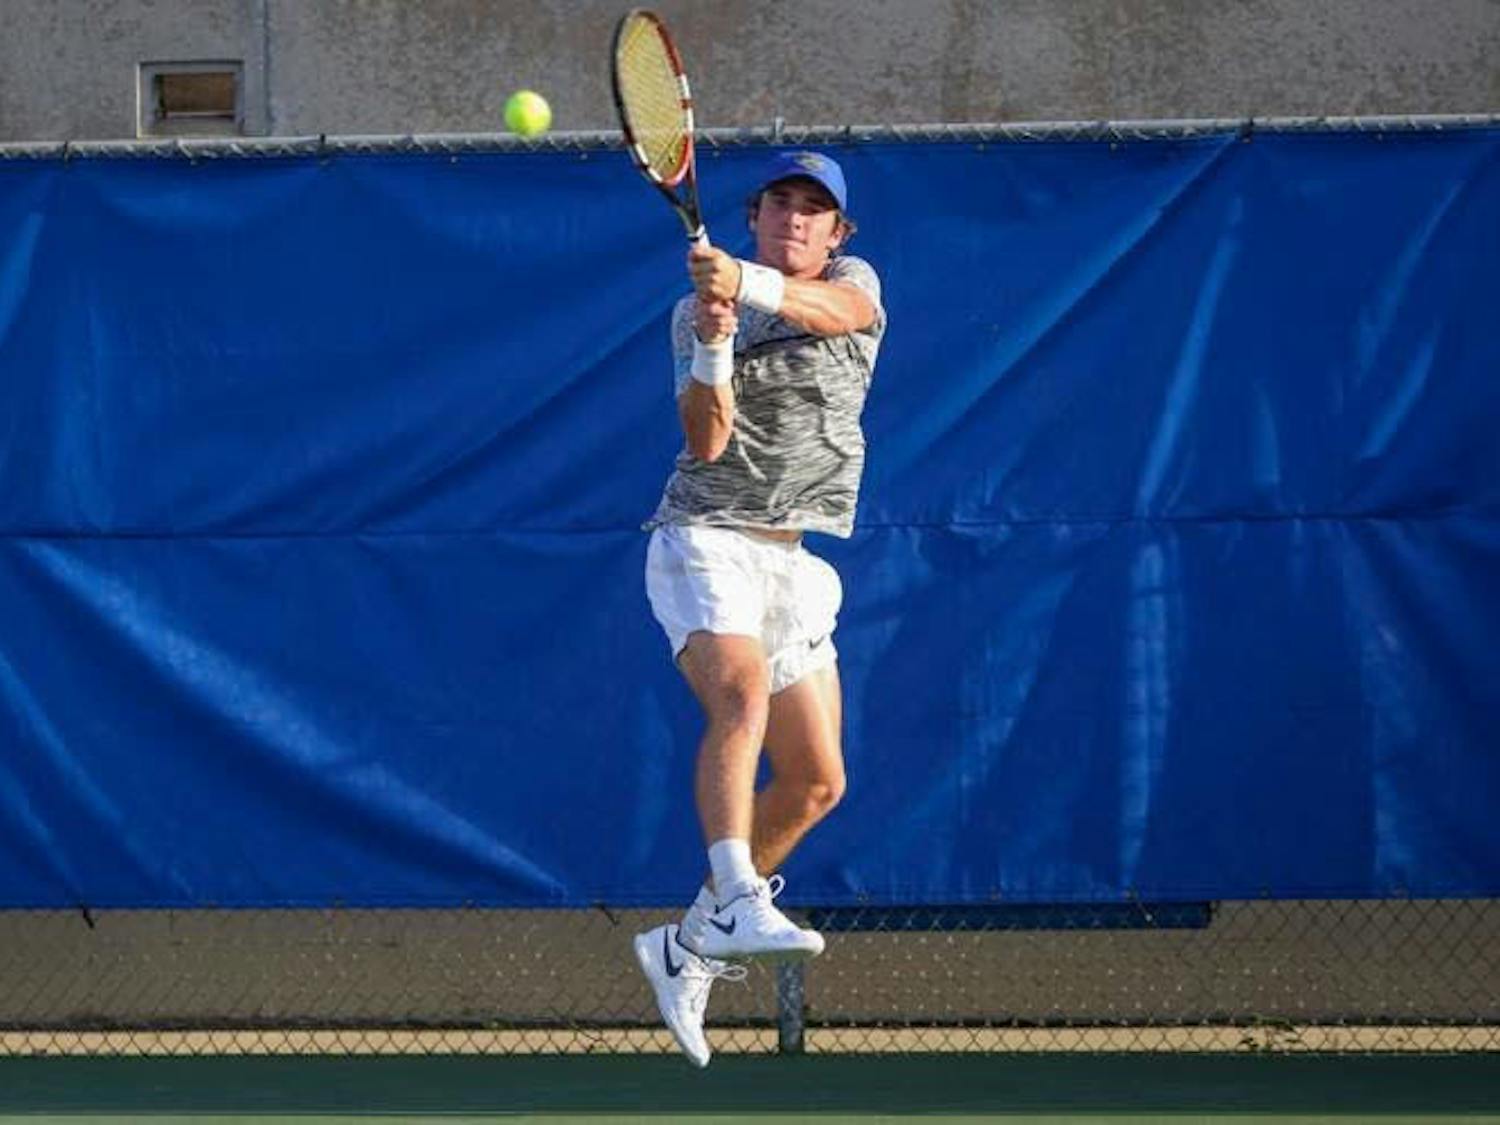 Sophomore Oliver Crawford won the singles portion of the USA F28 Futures tournament in Harlingen, Texas.